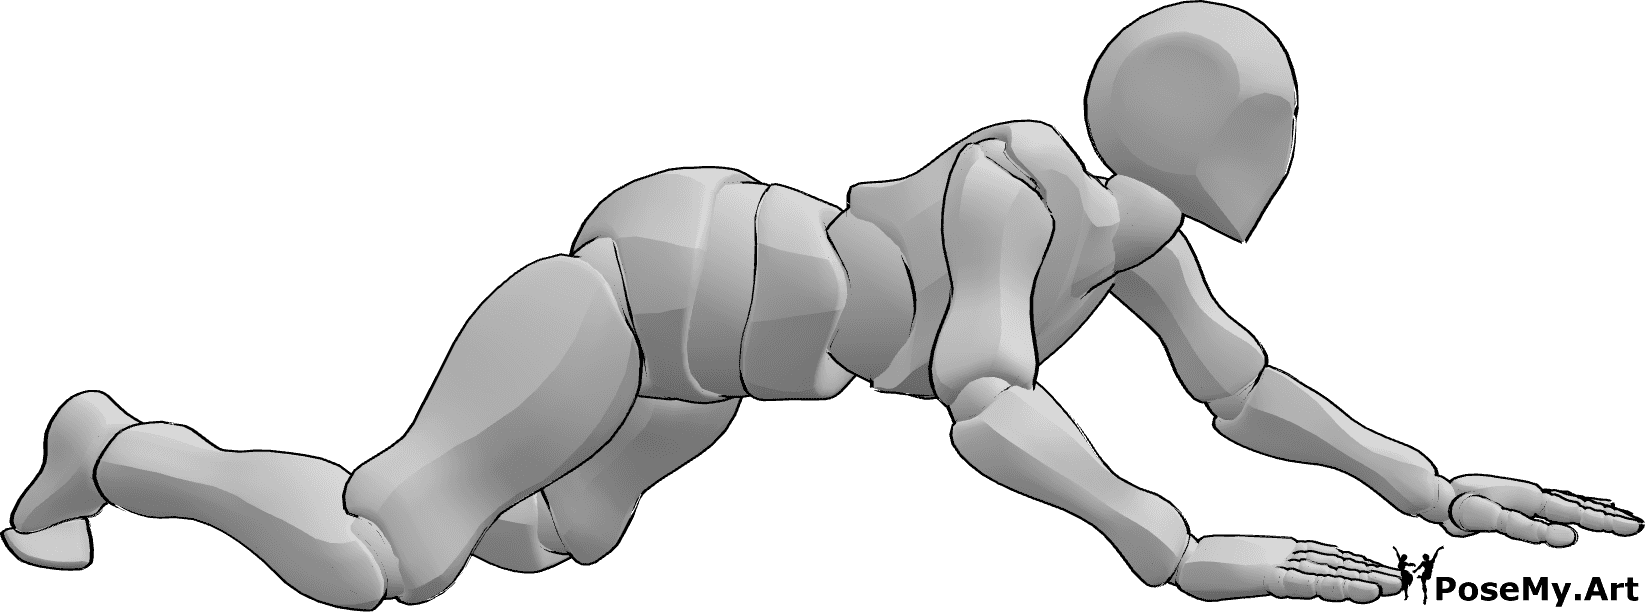 Pose Reference- Male crawling knees pose - Male is crawling on his knees, using his palms and knees to crawl